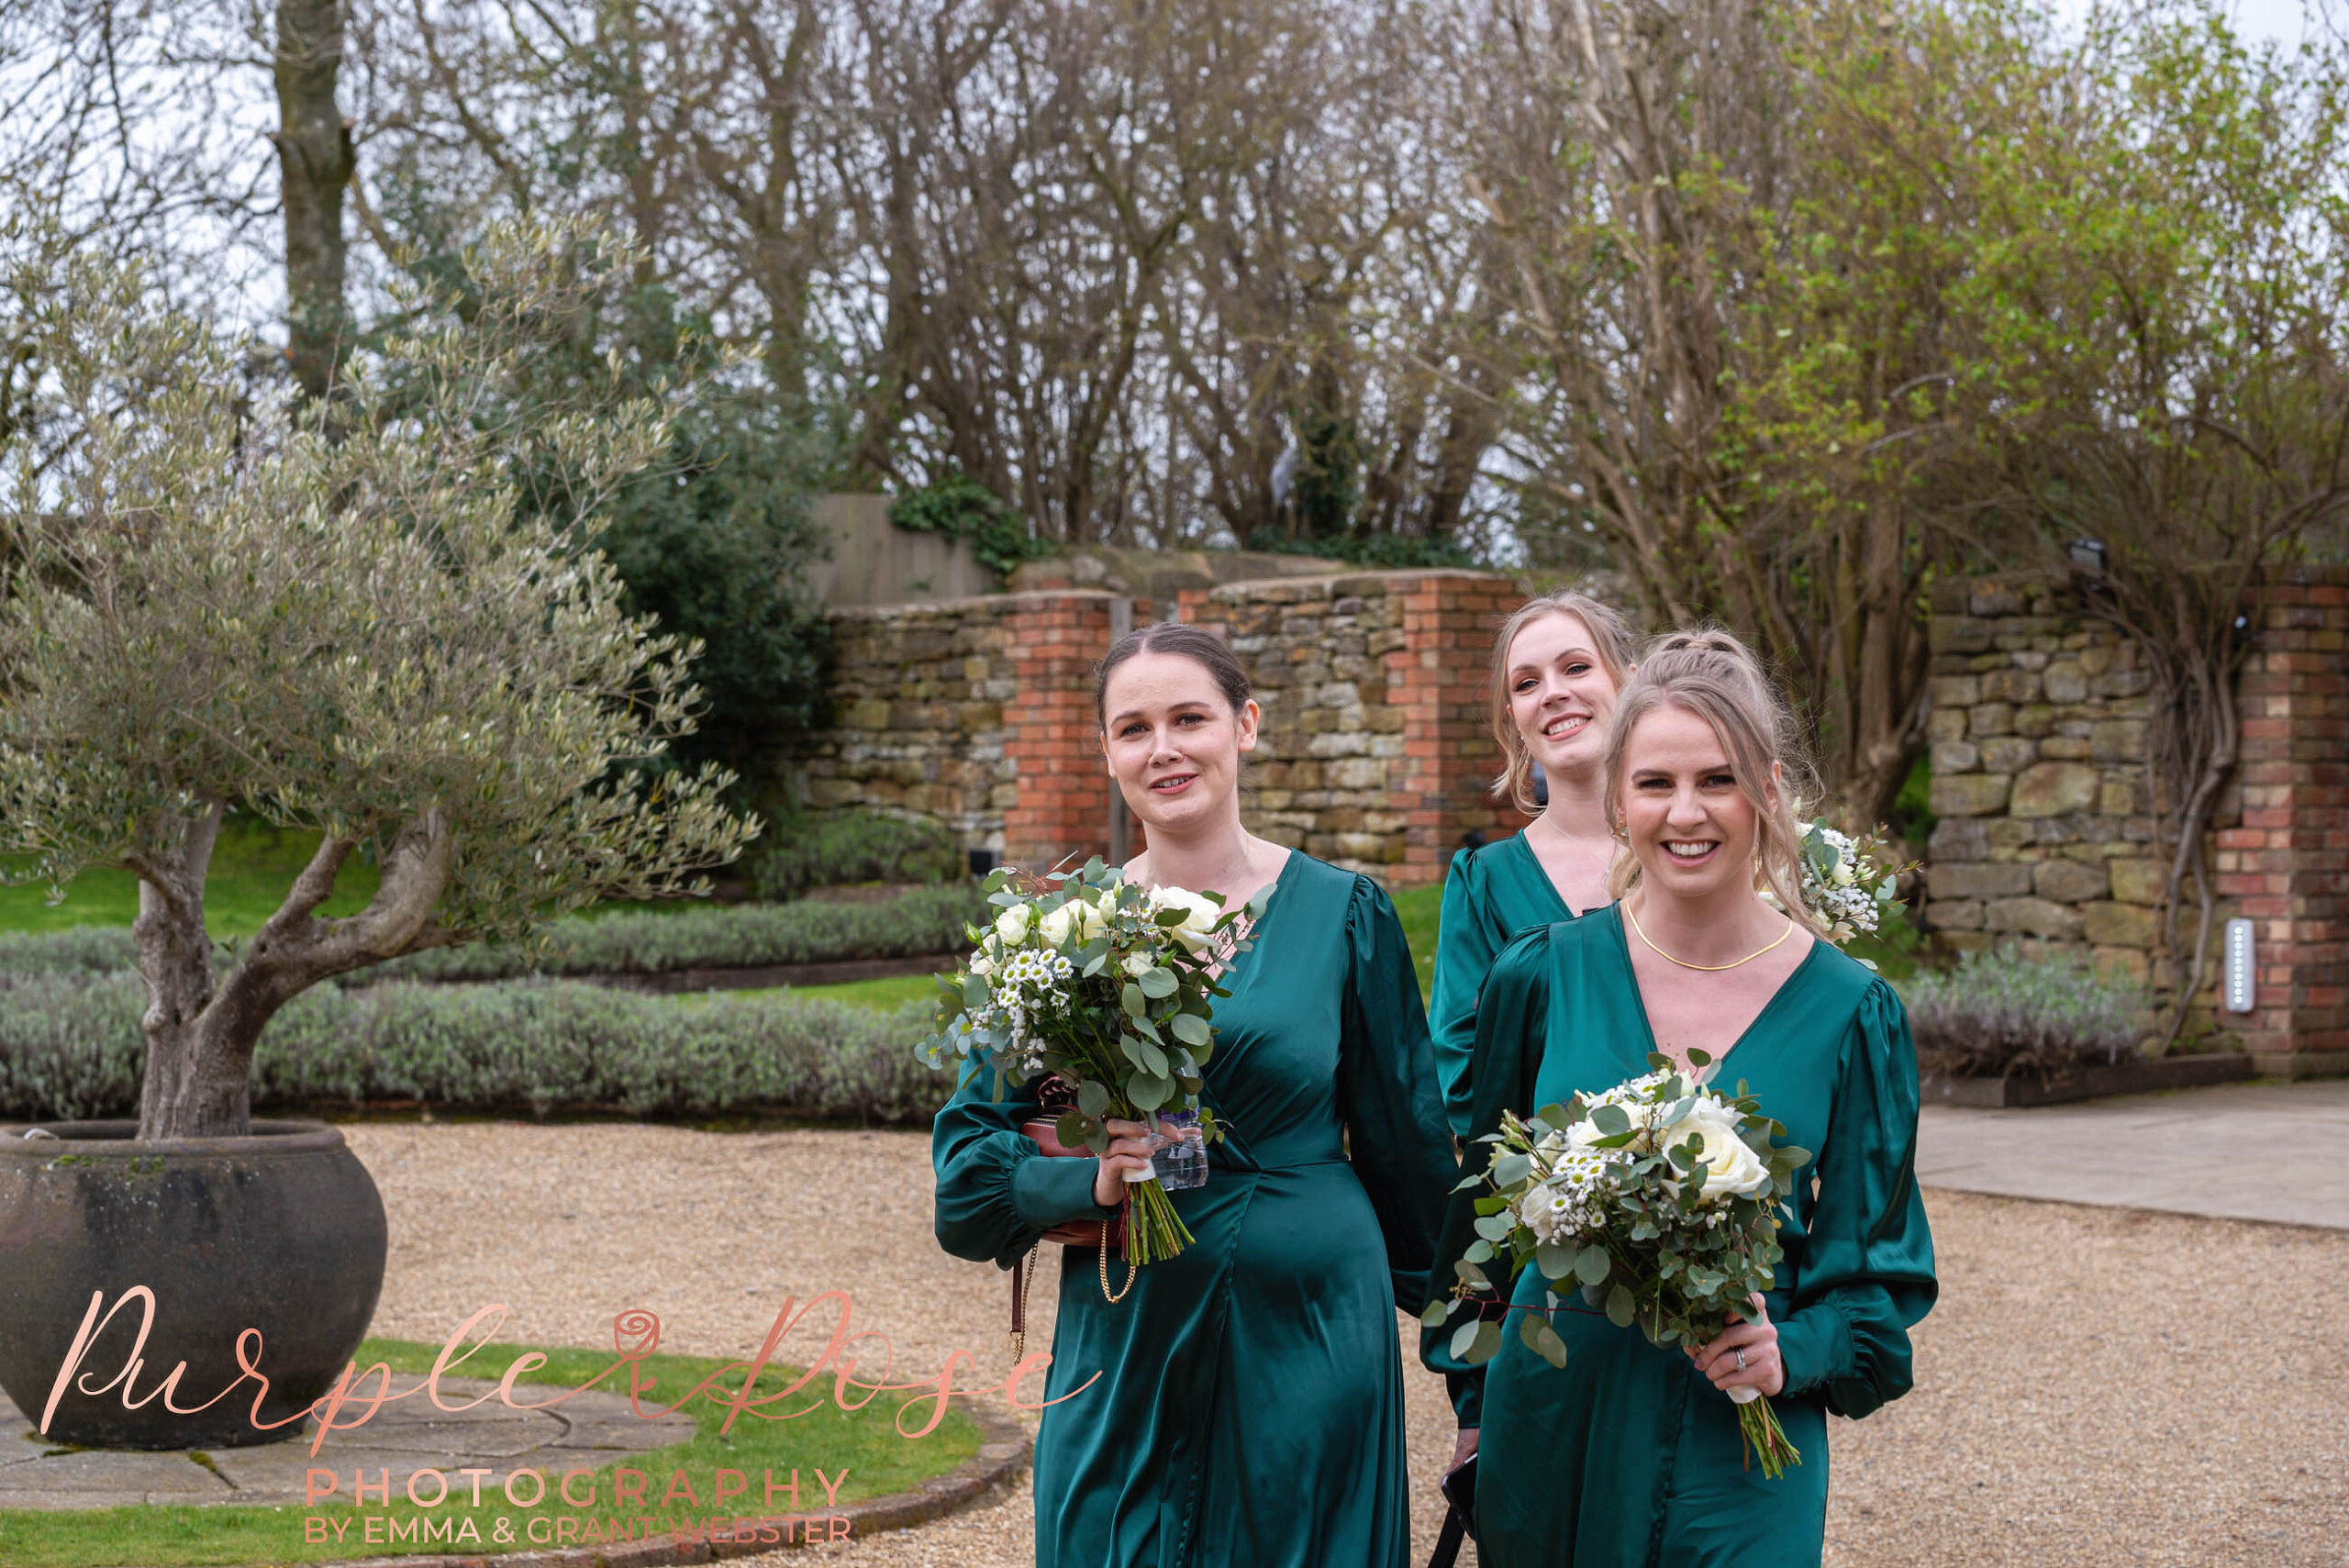 Photo of brides mads walking to the wedding ddressed in green dresses at a wedding in Milton Keynes